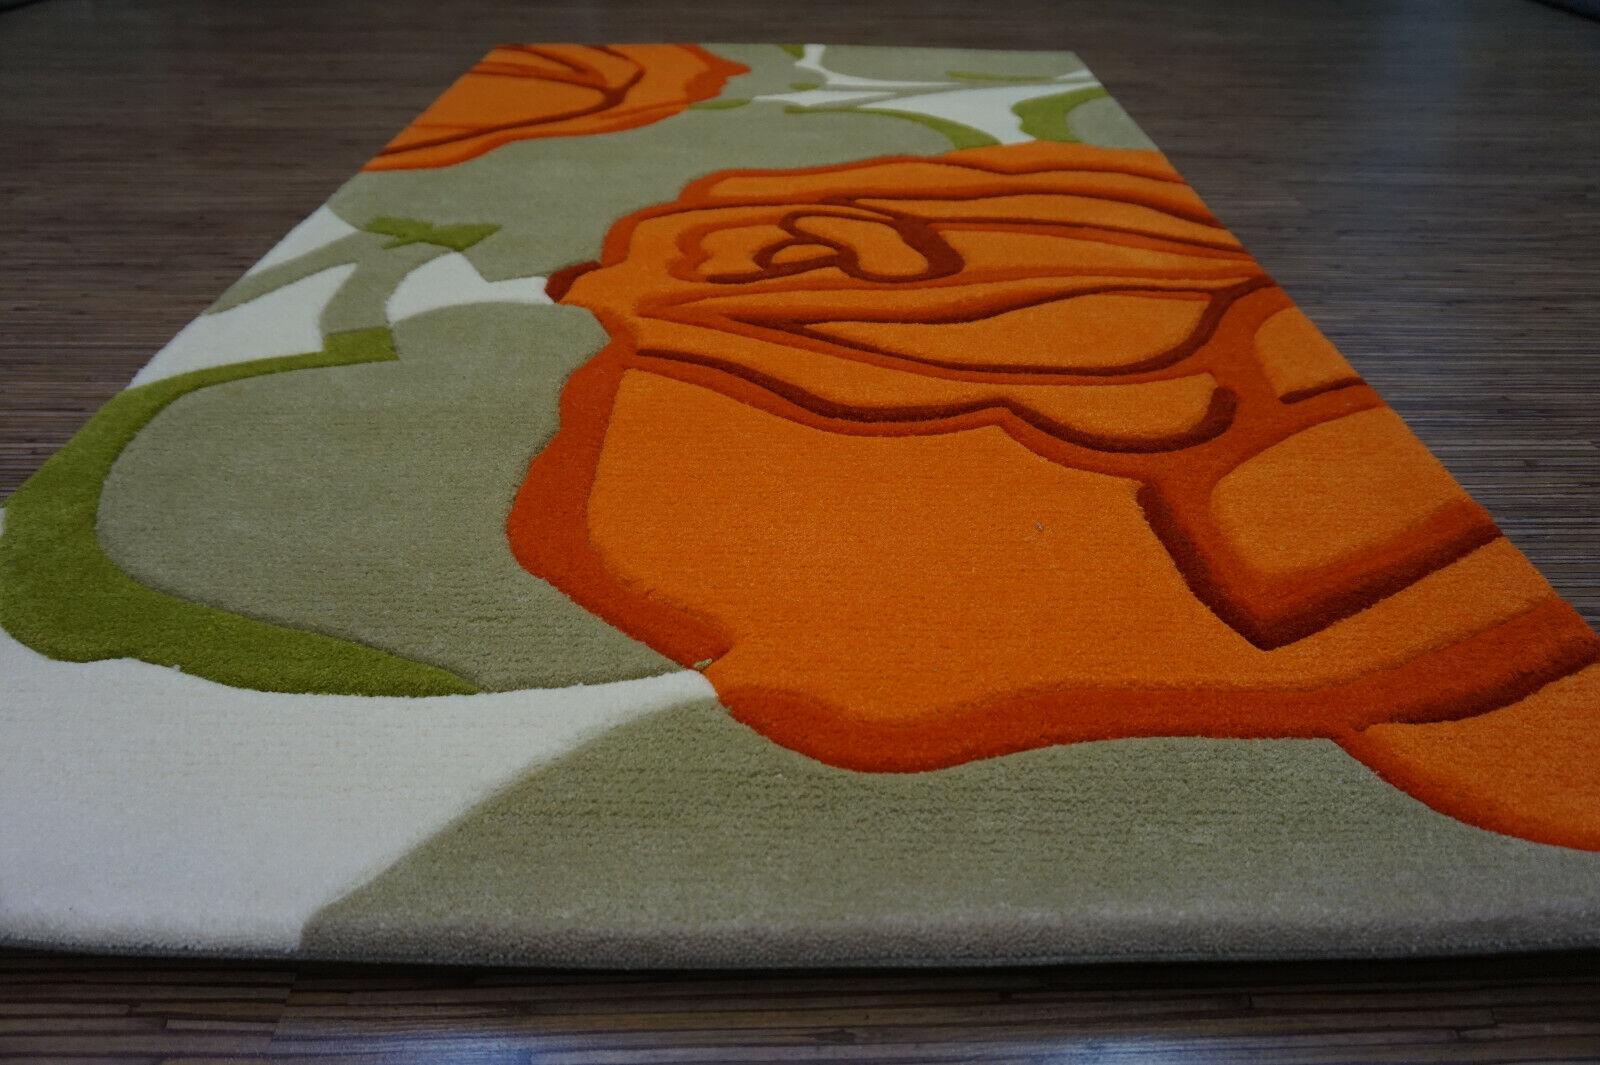 Hand-Tufted Vintage Chinese Rug With Roses 2.9' x 5.2', 1990s - 1D39 For Sale 1